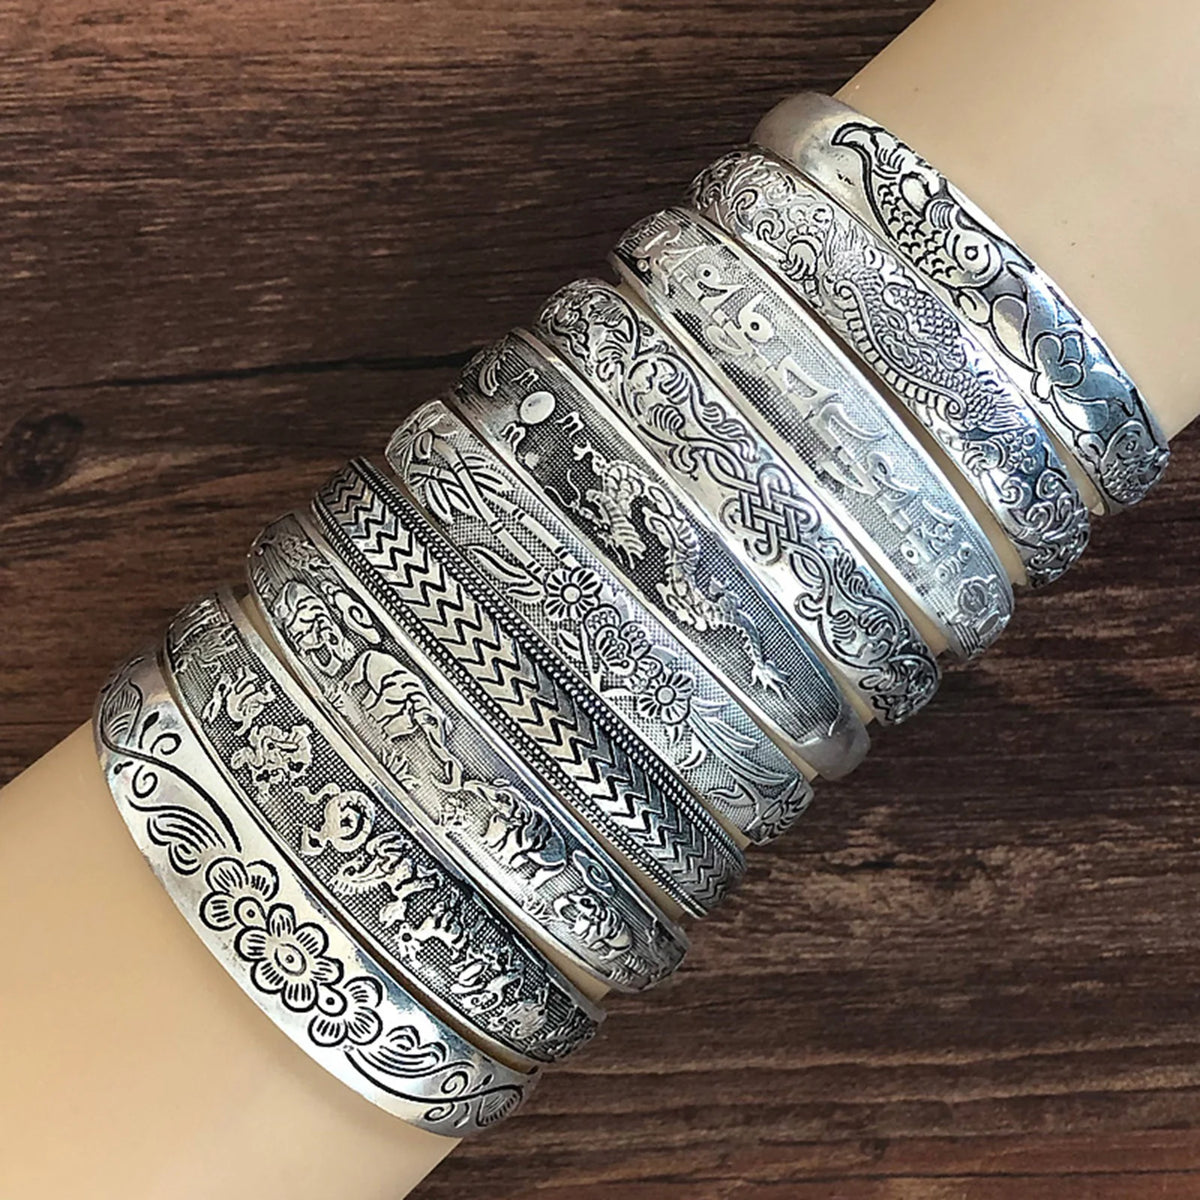 Vintage Antique Silver Color Animal Snake Flower Pattern Bangles For Women Bohemian Open Metal Bracelets Party Jewelry Gifts